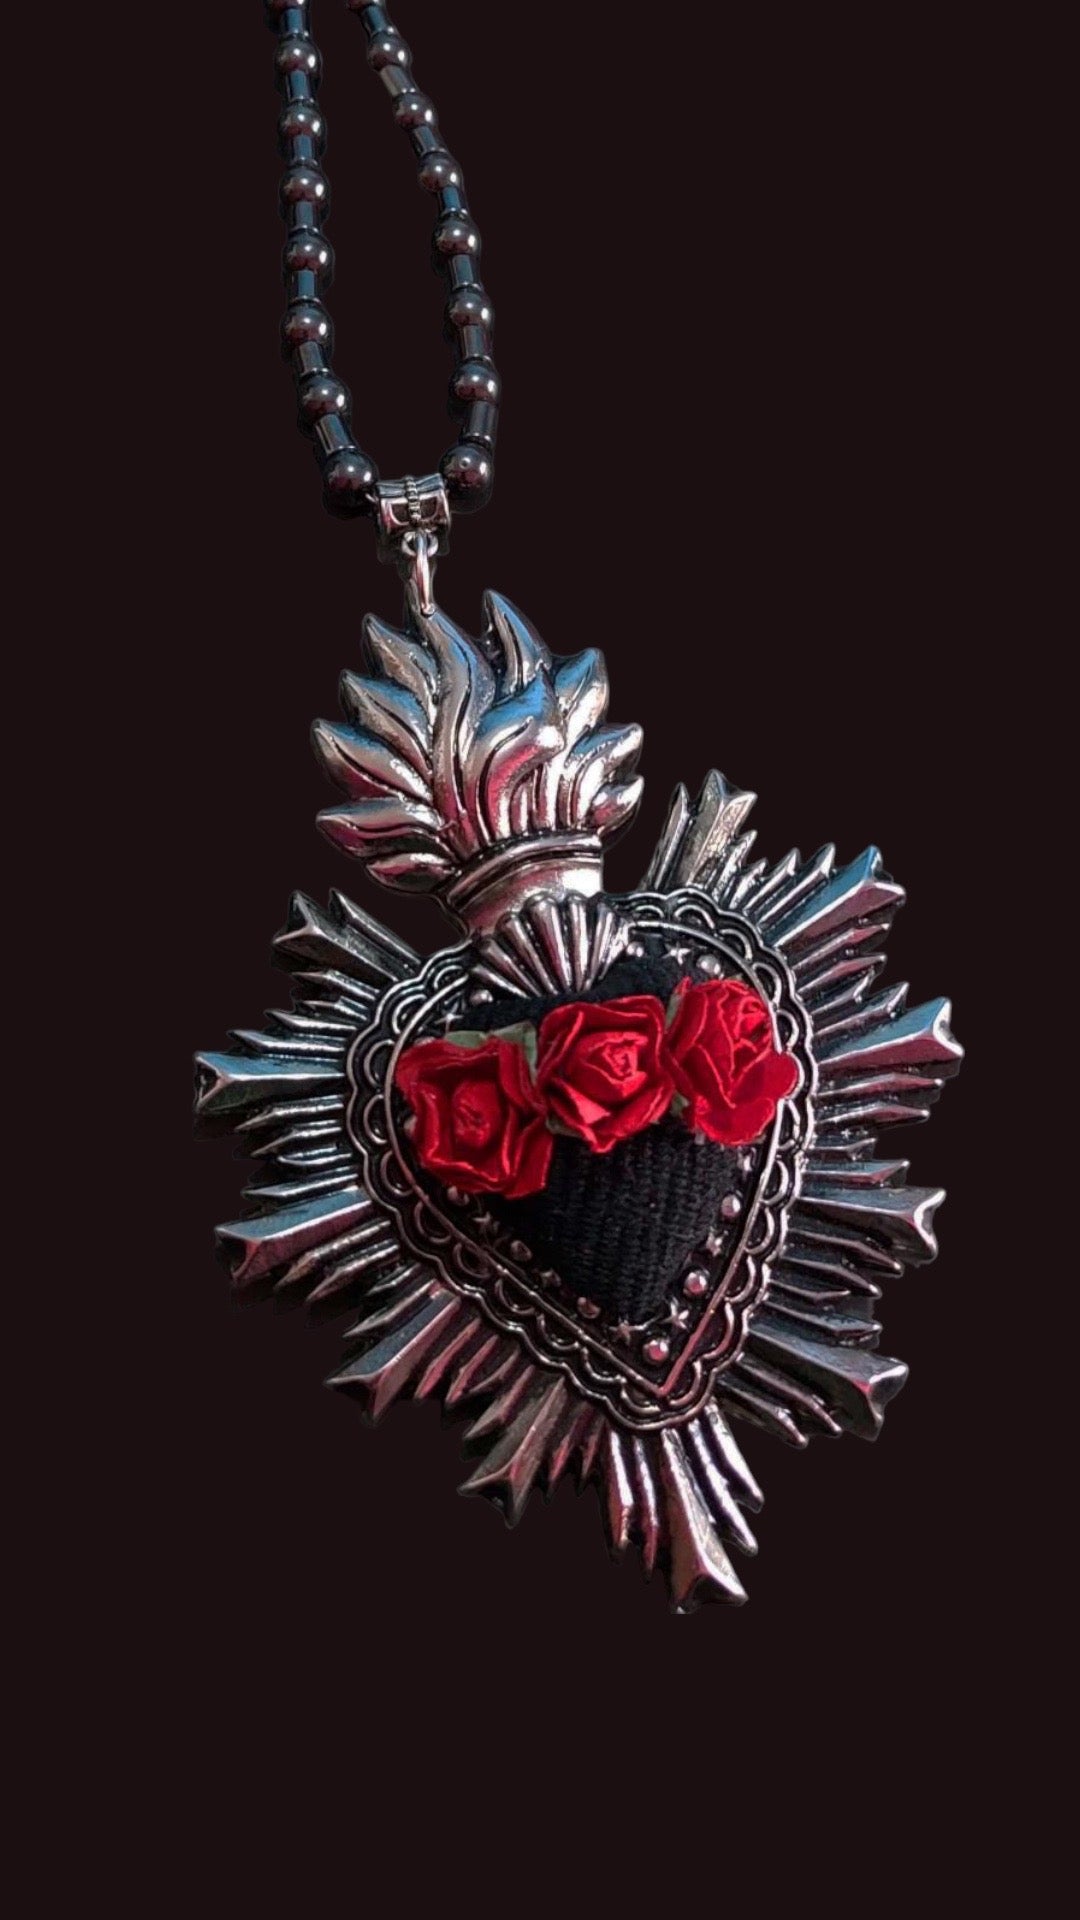 Black and red heart cultural fashion necklace. It has in the center three handmade red roses and around it has silver ornaments.